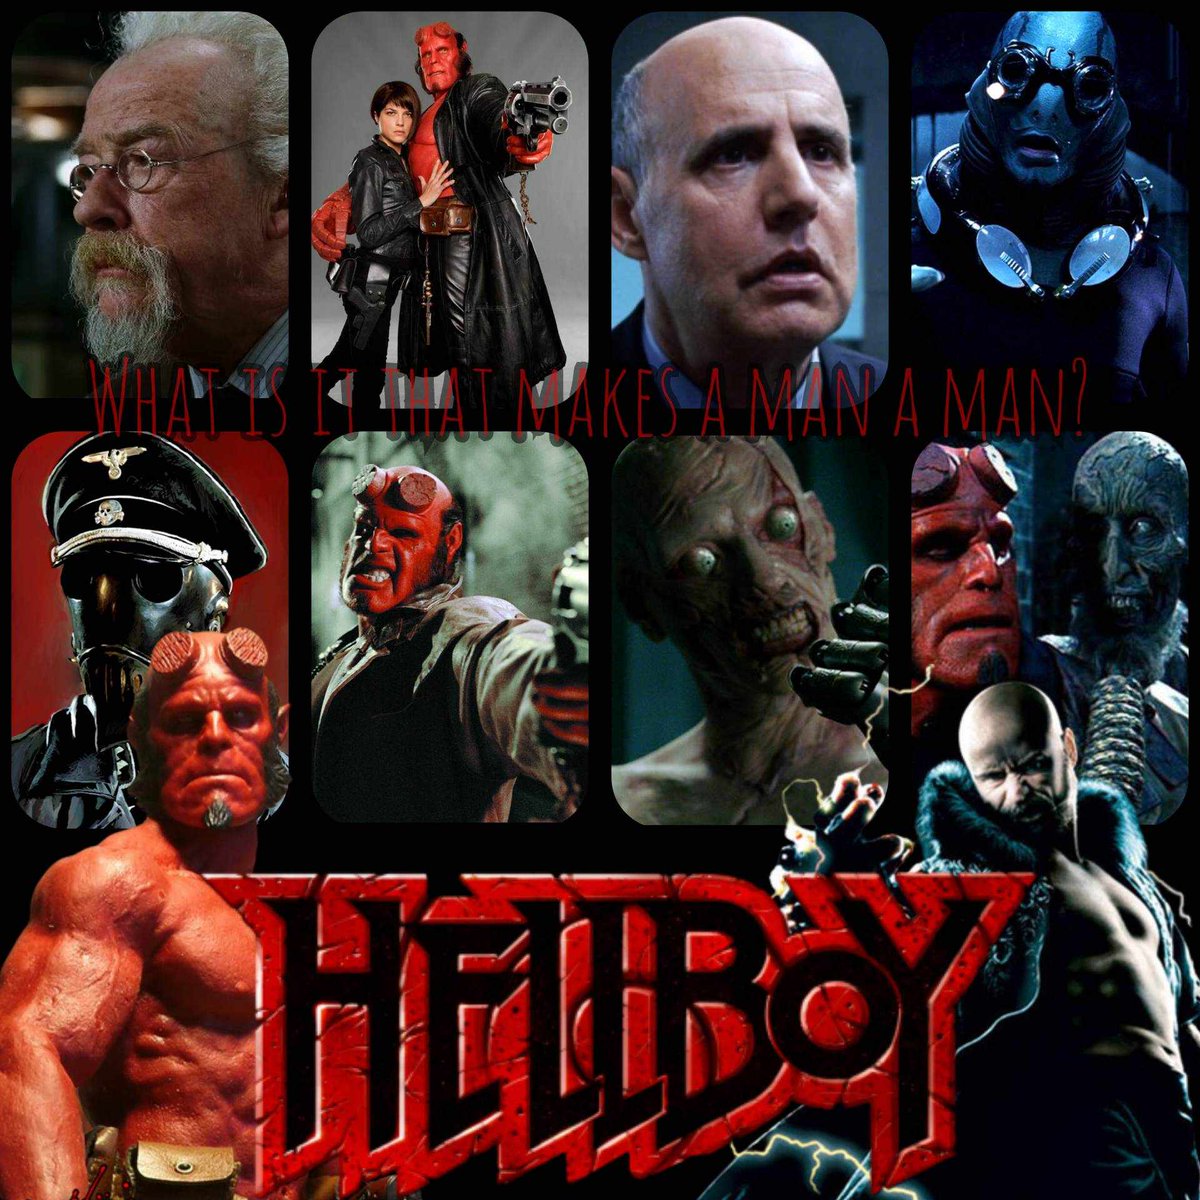 Released this day, 2004

'Hey hey hey, they're playing oursong.'
Are you a fan?

#Hellboy
#RonPerlman
#HorrorCommunity